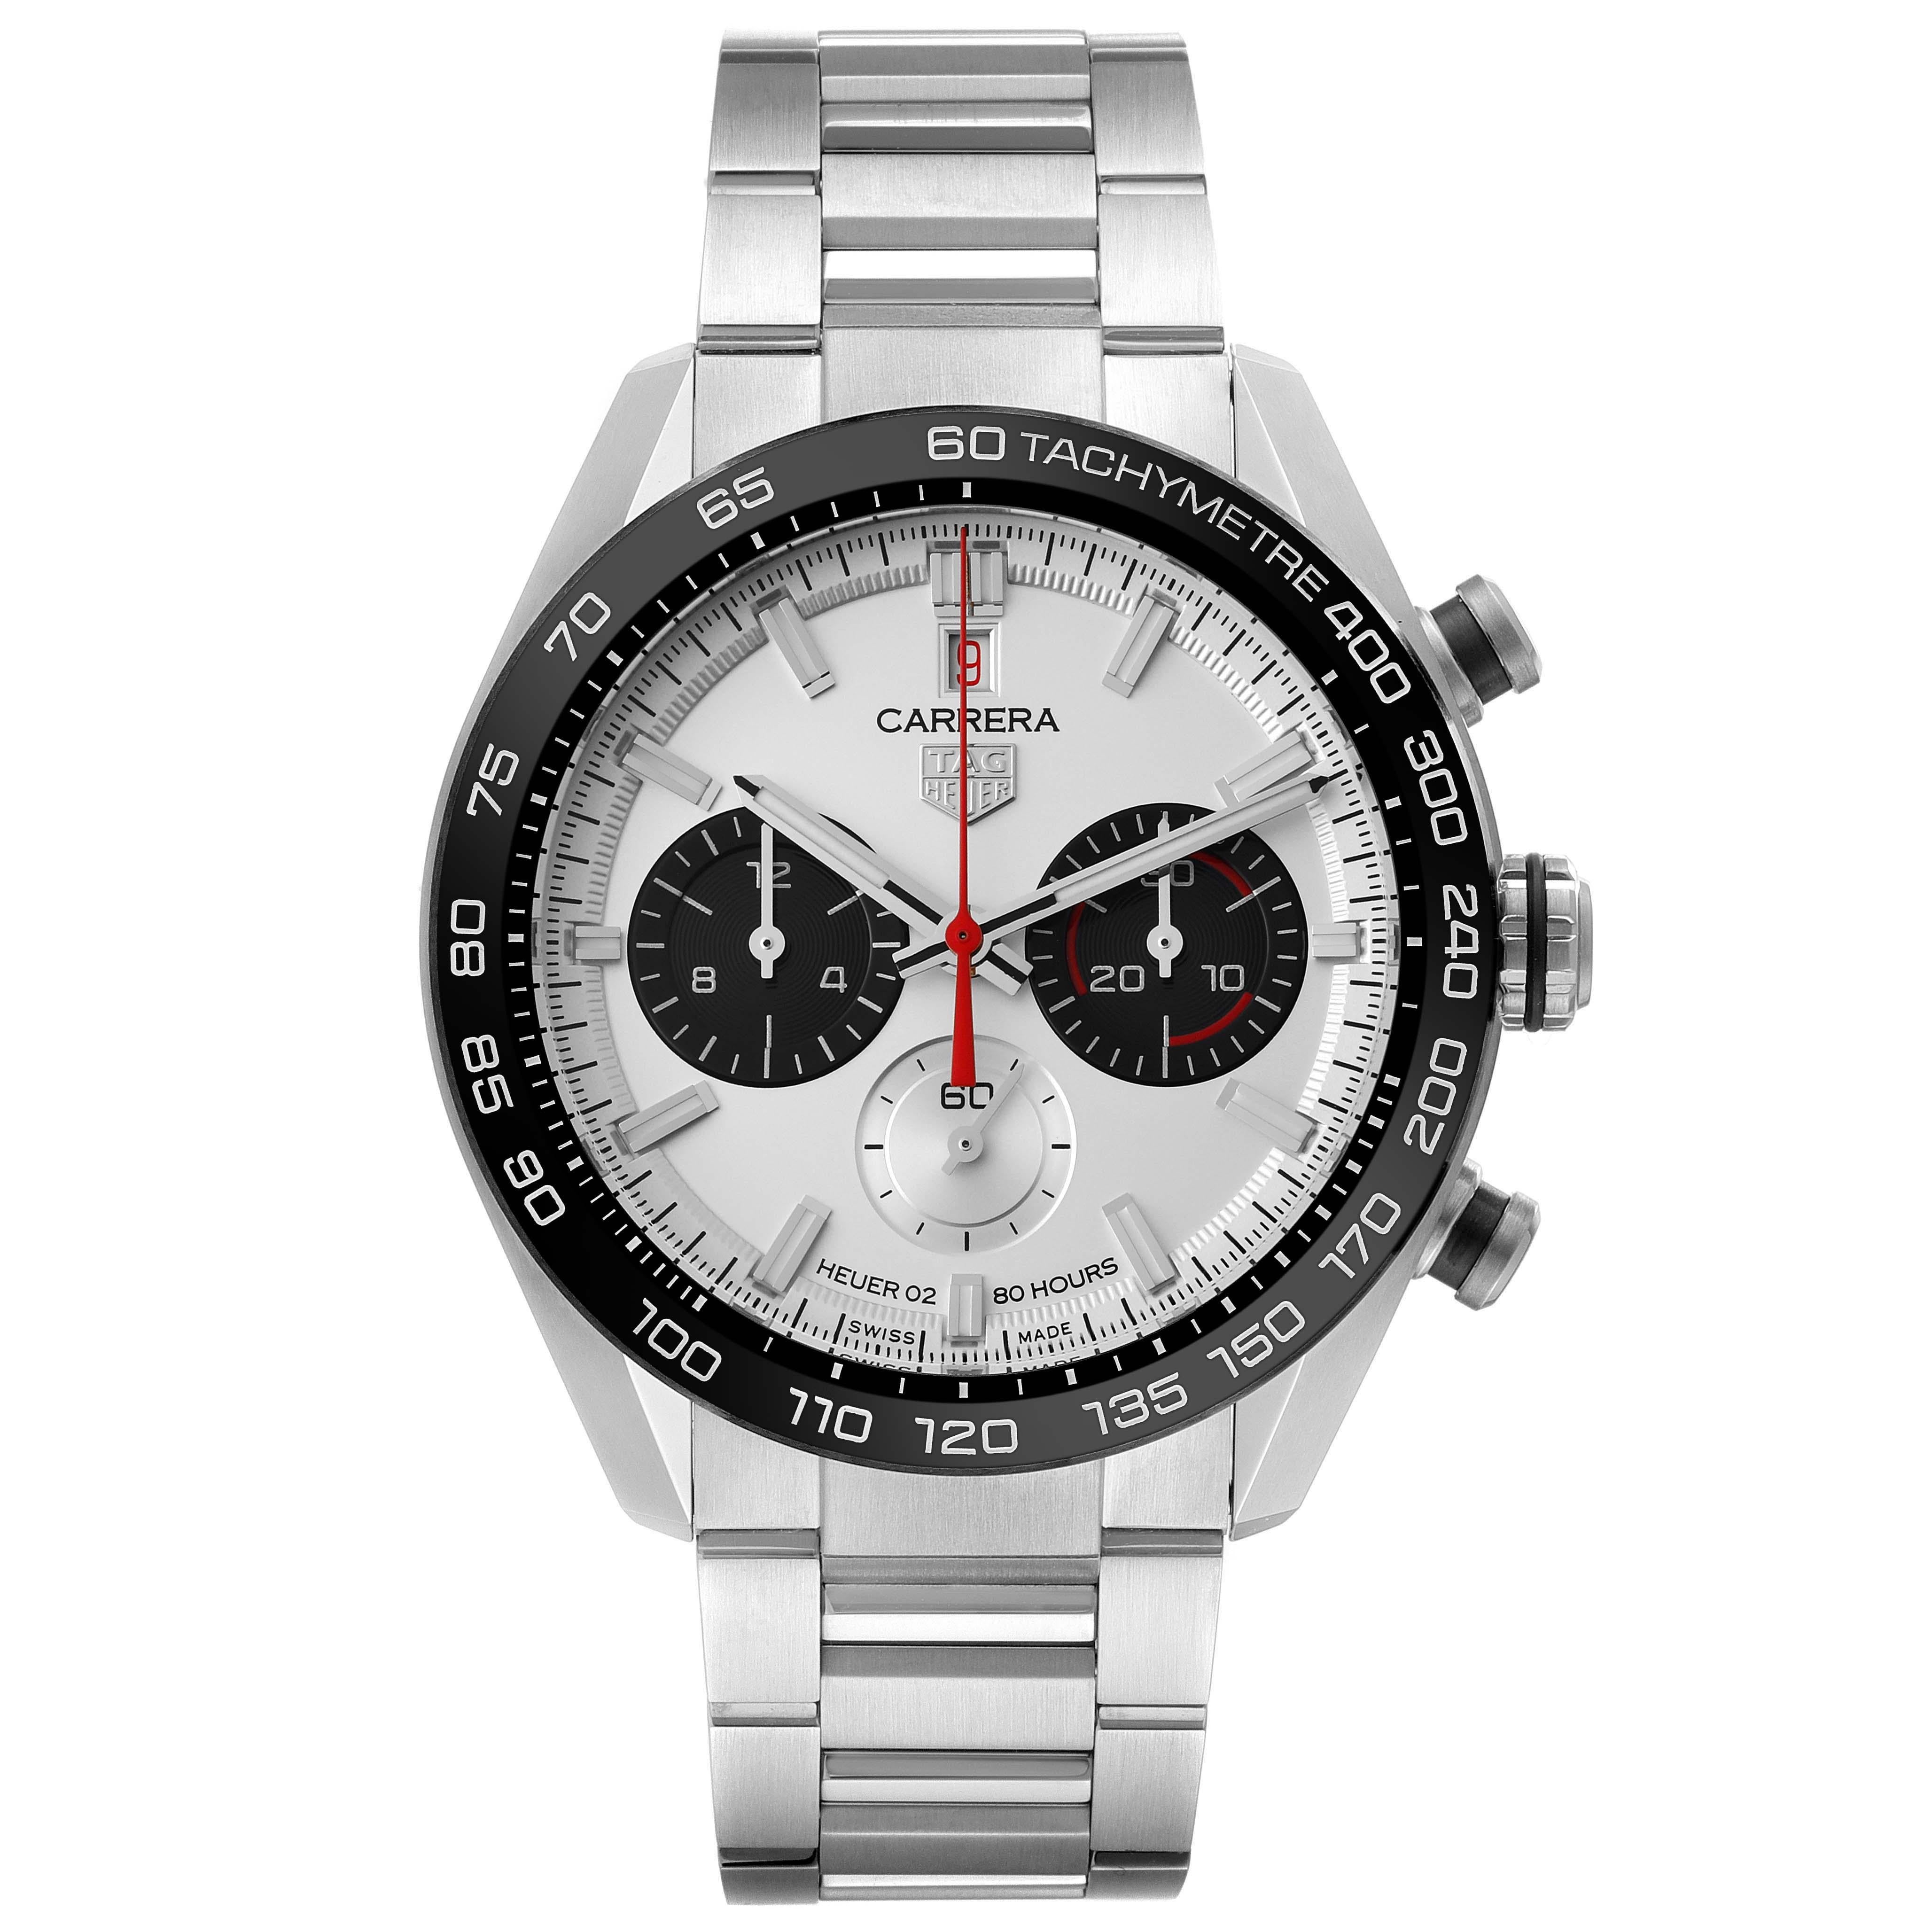 Tag Heuer Carrera Anniversary LE Steel Silver Dial Mens Watch CBN2A1D Unworn. Automatic self-winding chronograph movement. Stainless steel round case 44.0 mm. Transperent sapphire crystal back. Black ceramic tachymeter scale bezel. Scratch resistant